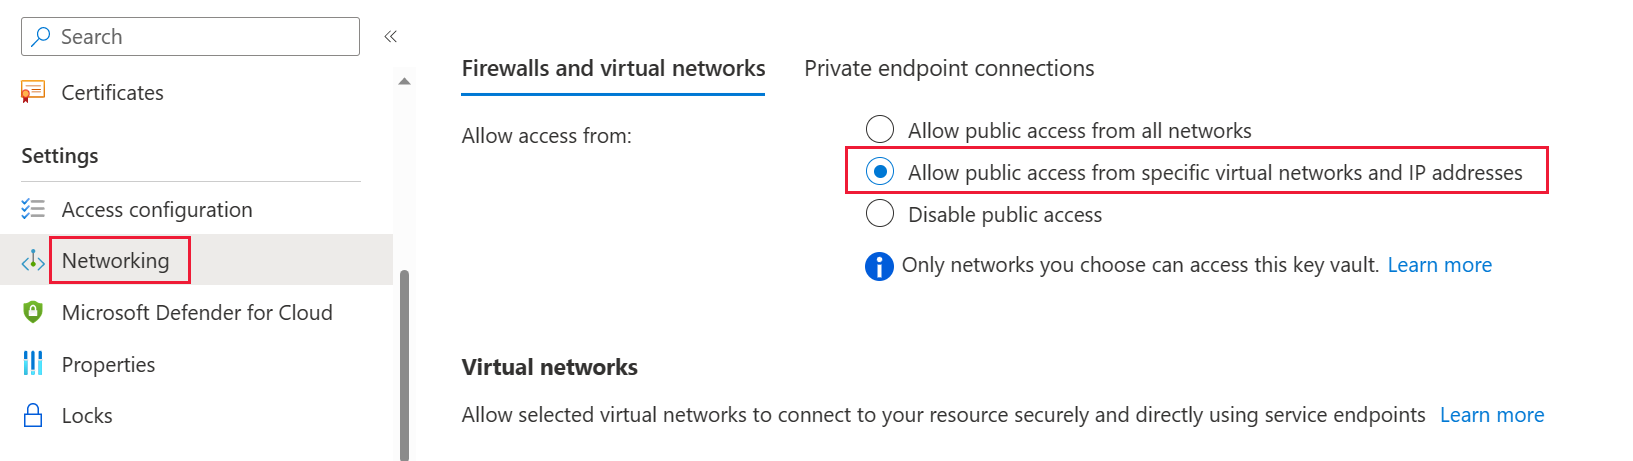 Screenshot of the Azure Key Vault networking option, with the firewalls and virtual networks option selected.